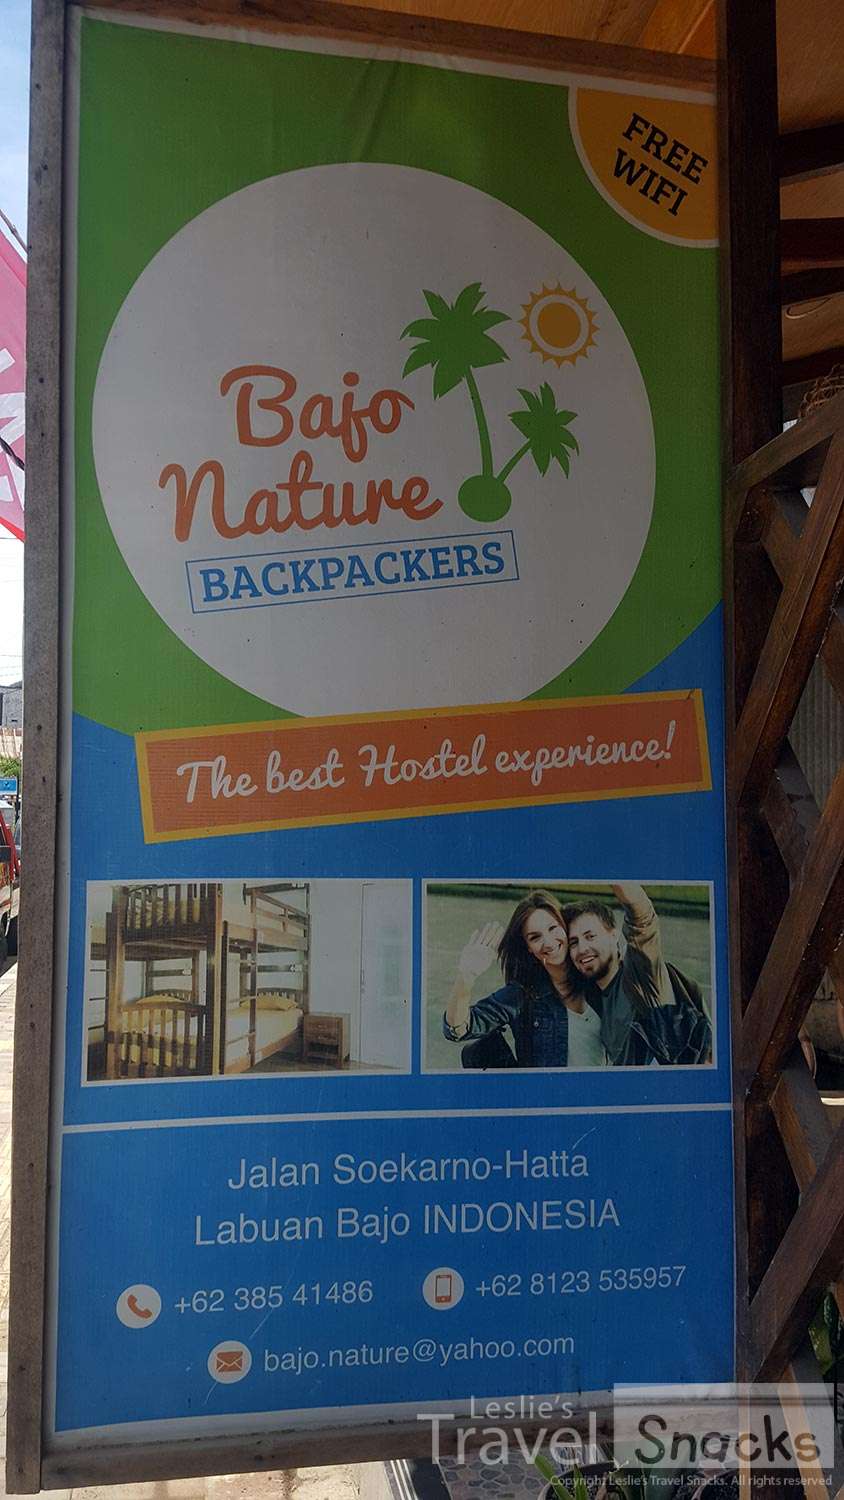 Bajo Nature Backpacker's is a great place to stay!